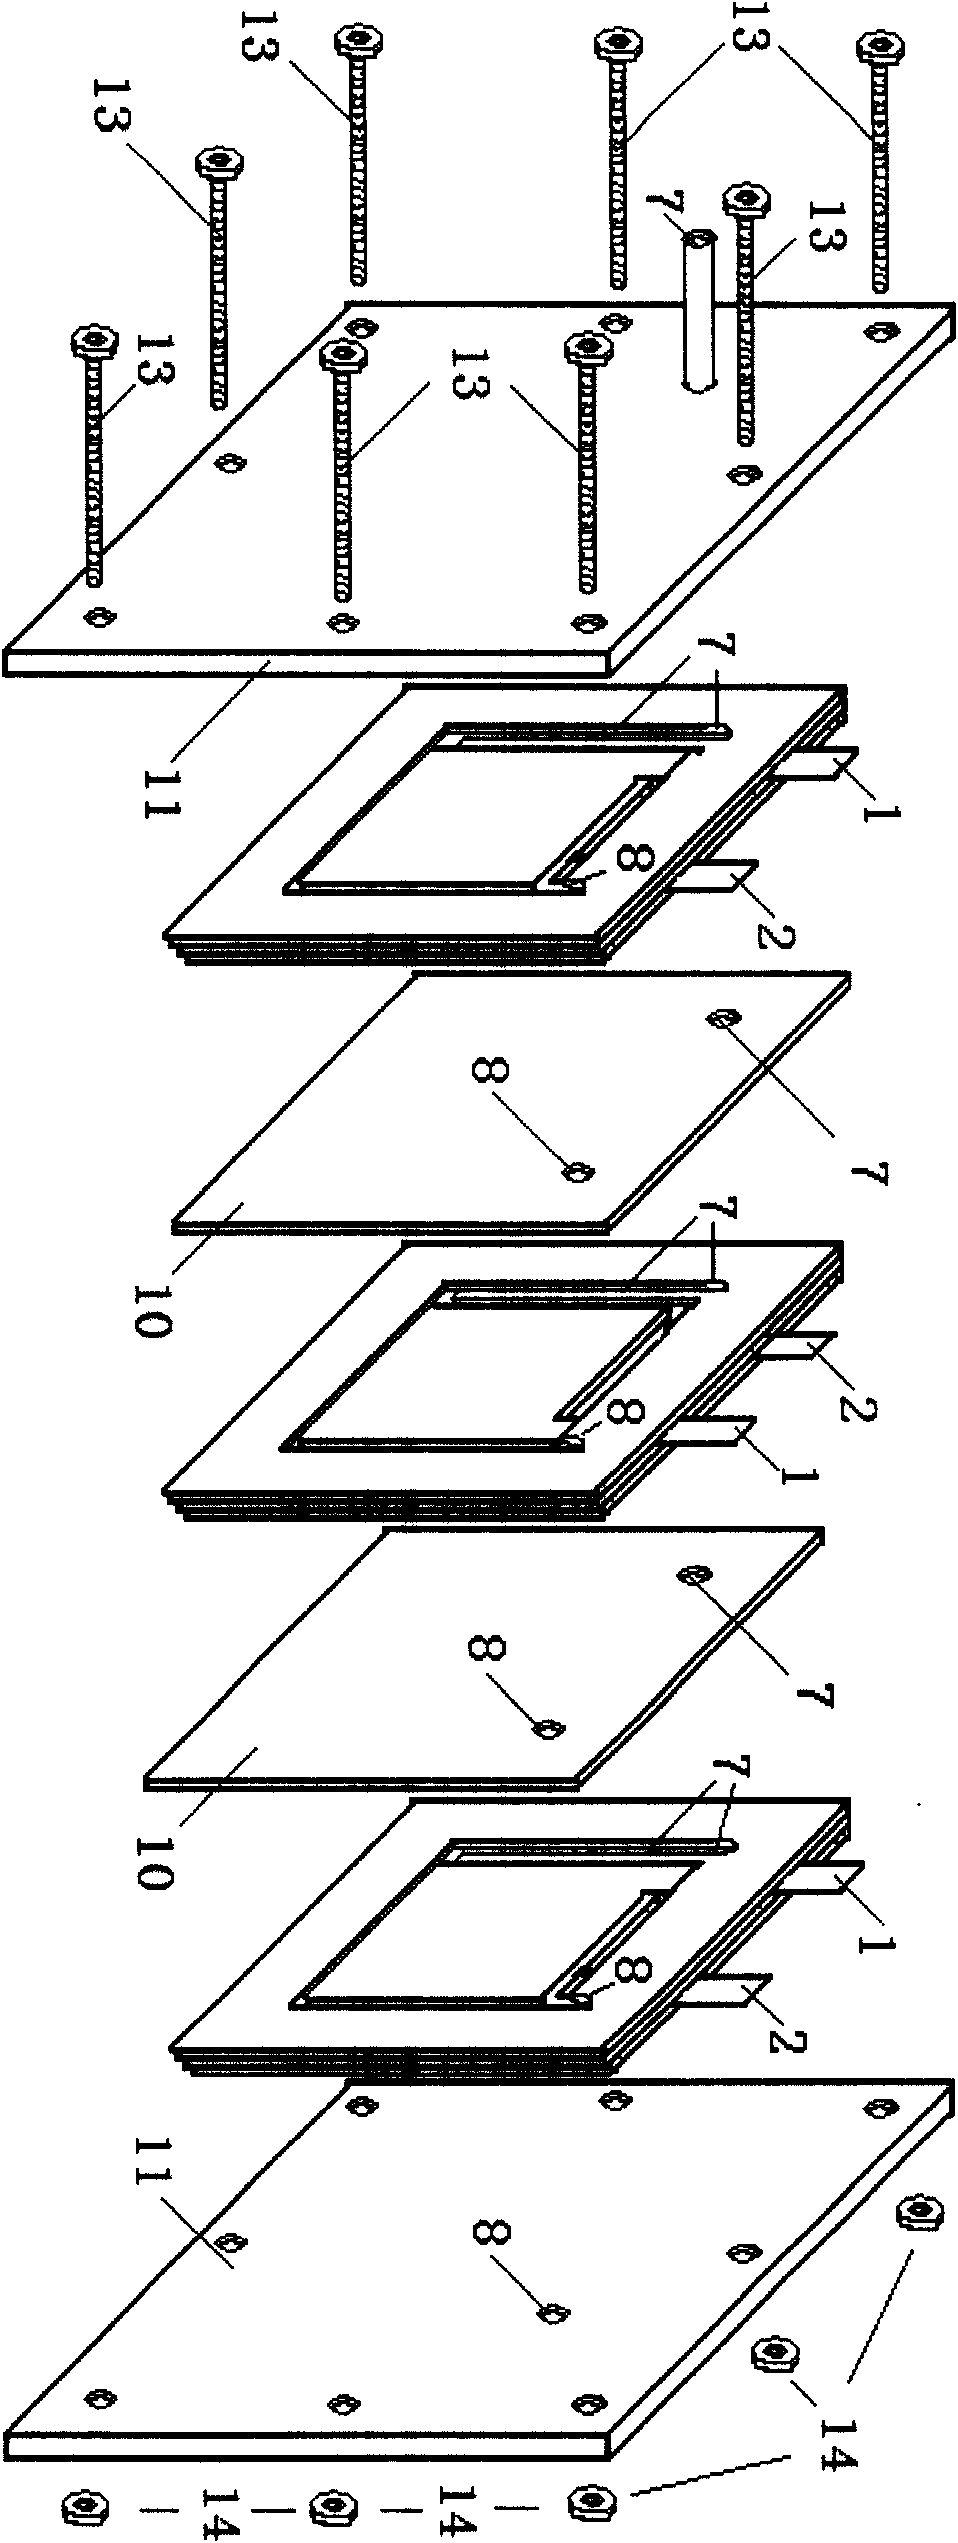 Electrochemical zinc-water hydrogen production and storage system and applications thereof